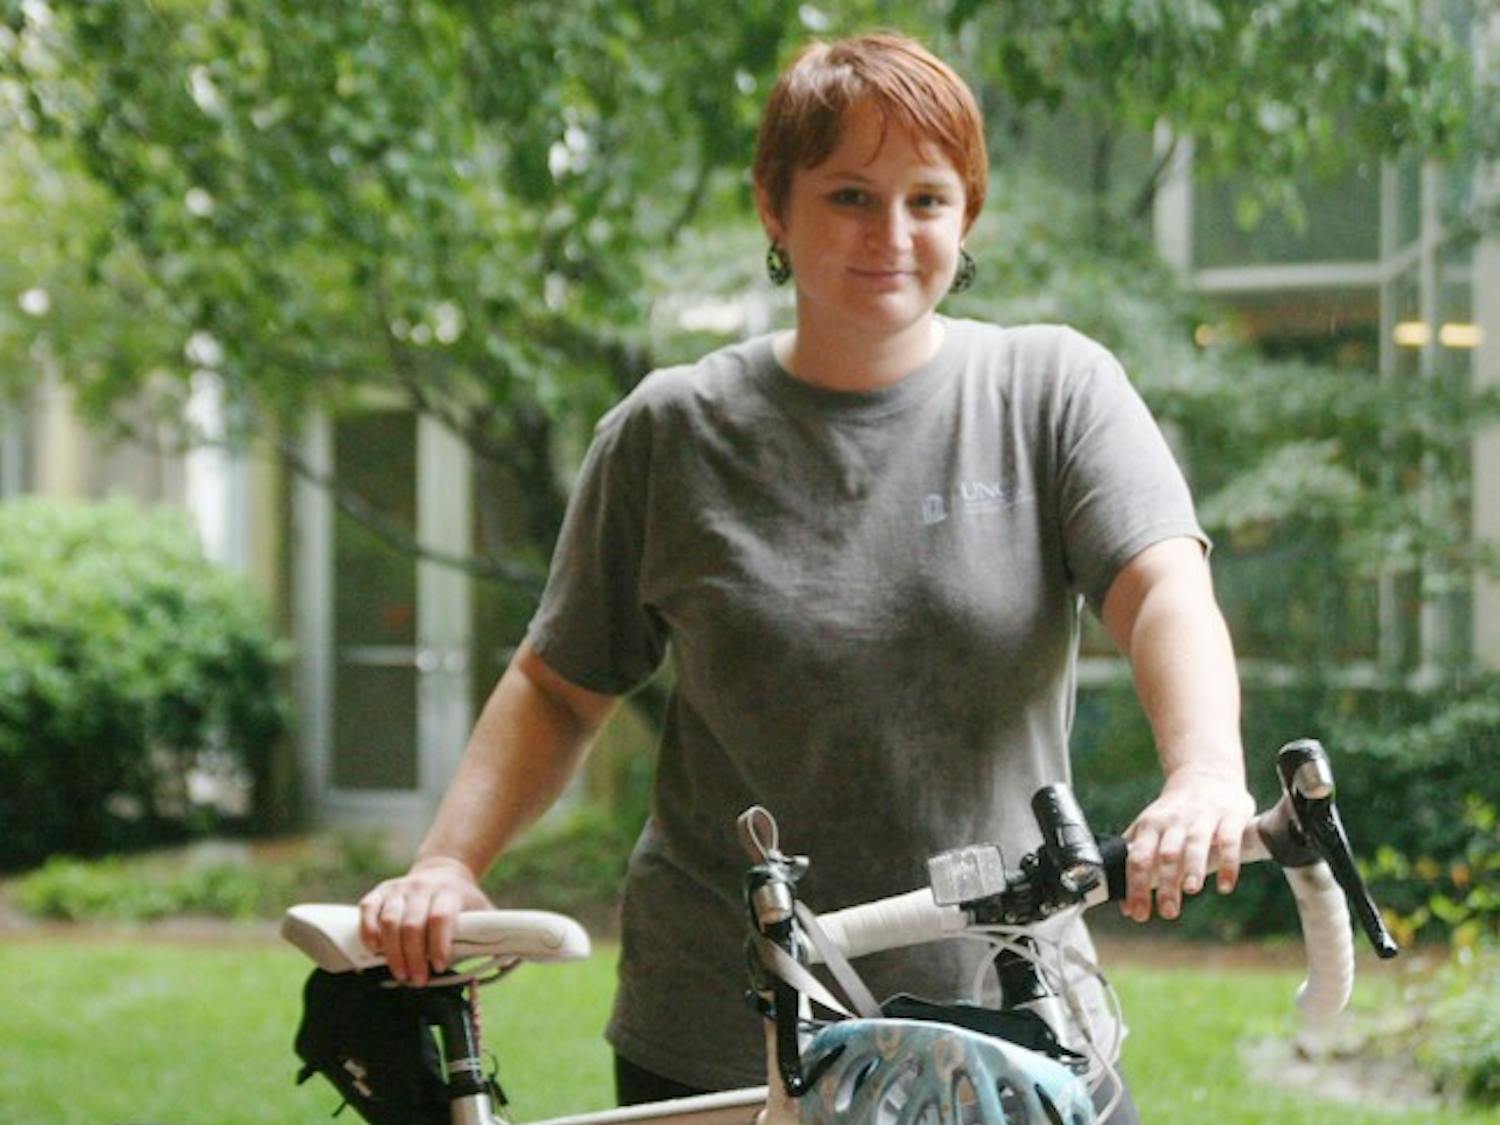 Photo: UNC law student bikes 476 miles to support public education (Elise Young)